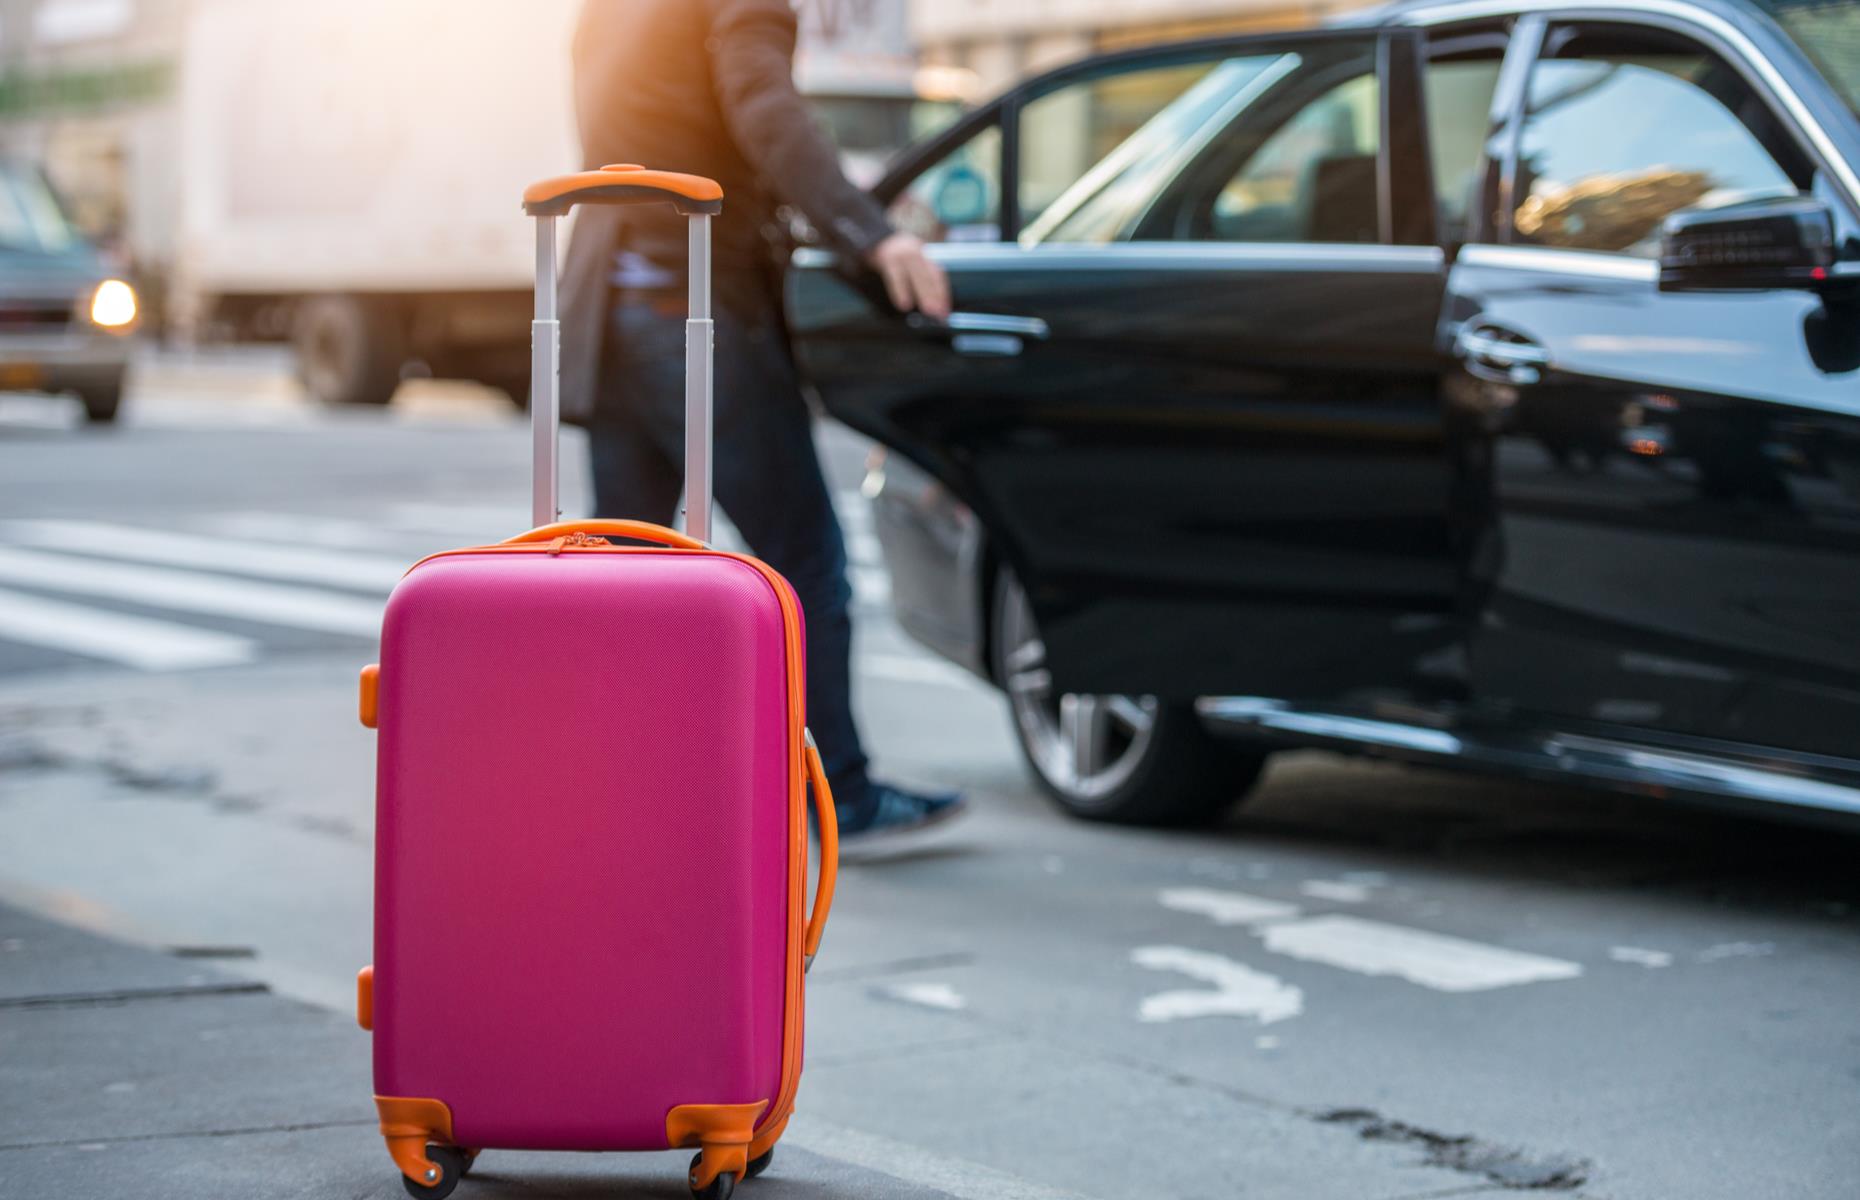 <p>Pre-book a taxi to the airport to avoid any last-minute panics or delays before your vacation has even begun and be sure to request car seats, if you need them. If you’re driving to the airport, <a href="https://www.heathrow.com/transport-and-directions/heathrow-parking/heathrow-meet-and-greet-parking">book a Meet and Greet parking service</a> (if available). You drive to the short-stay parking lot, unload your luggage, and hand over your keys before breezing into departures. It’s also well worth pre-arranging your transfer on arrival, so you have a minibus or private driver waiting to whisk you off to your accommodation without delay. Again, enquire about car seats in advance.</p>  <p><a href="https://www.loveexploring.com/gallerylist/114719/airports-far-away-from-the-place-they-claim-to-serve"><strong>Be aware of these airports that are far away from the places they claim to serve</strong></a></p>